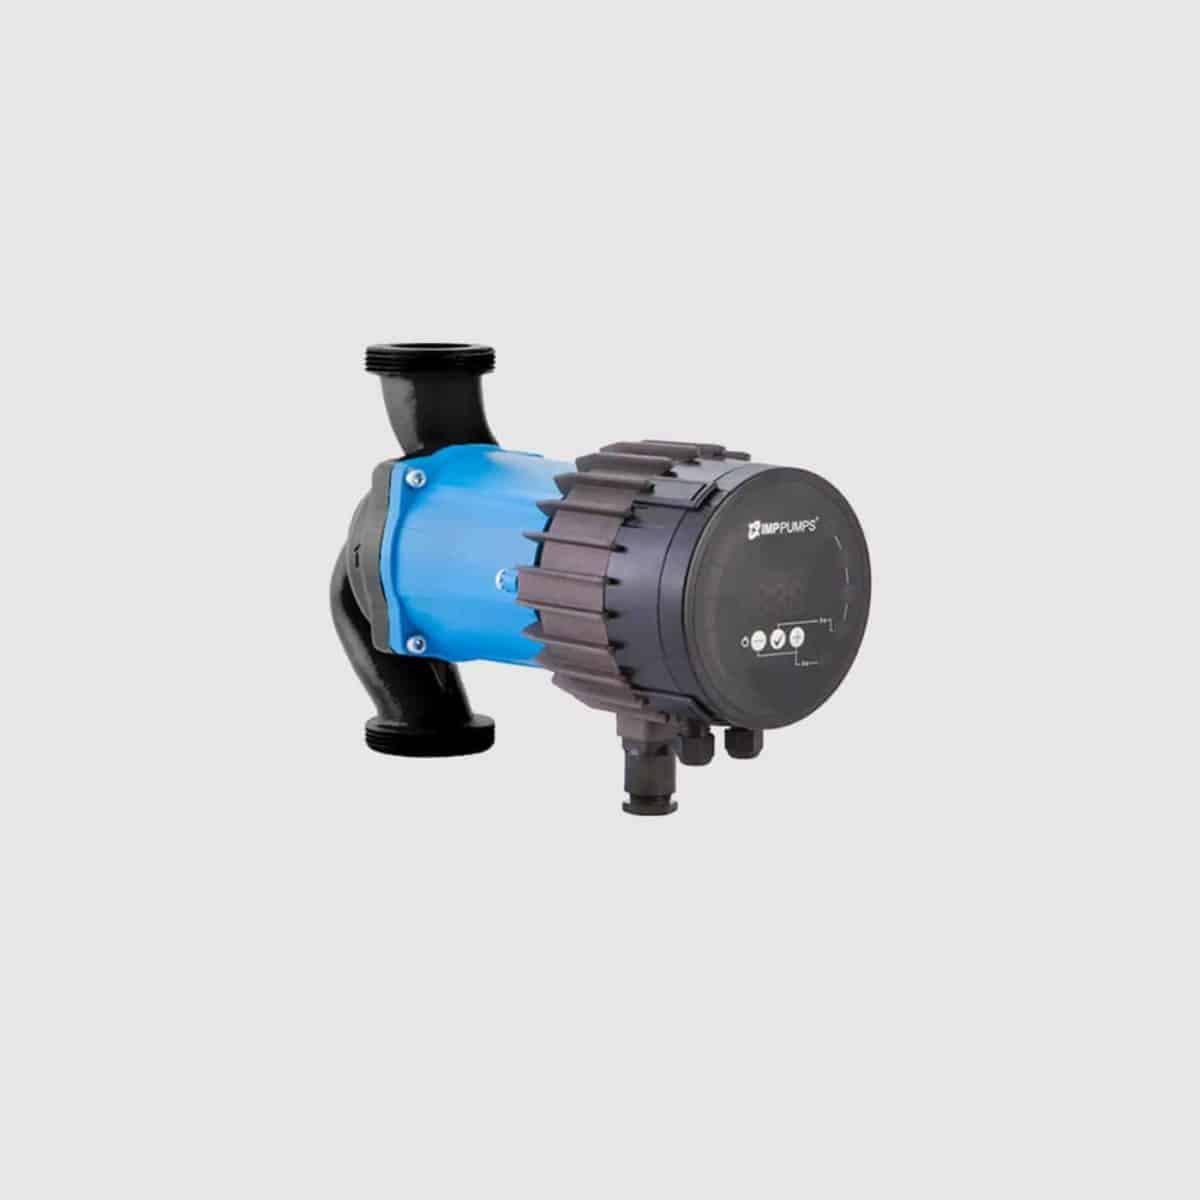 Electronically regulated pumps